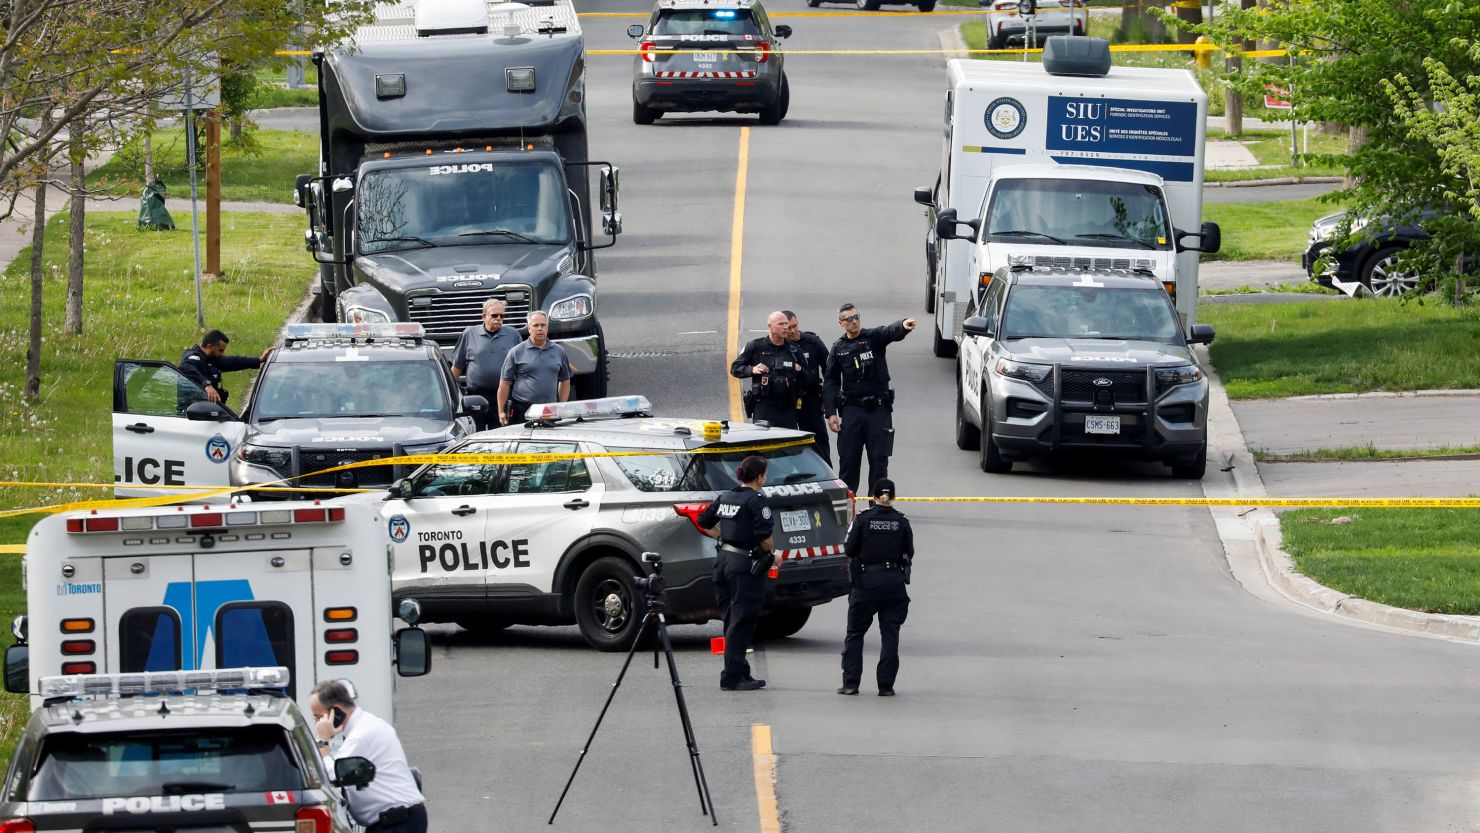 Toronto Police shot and injured a suspect who was walking down a city street carrying a gun.